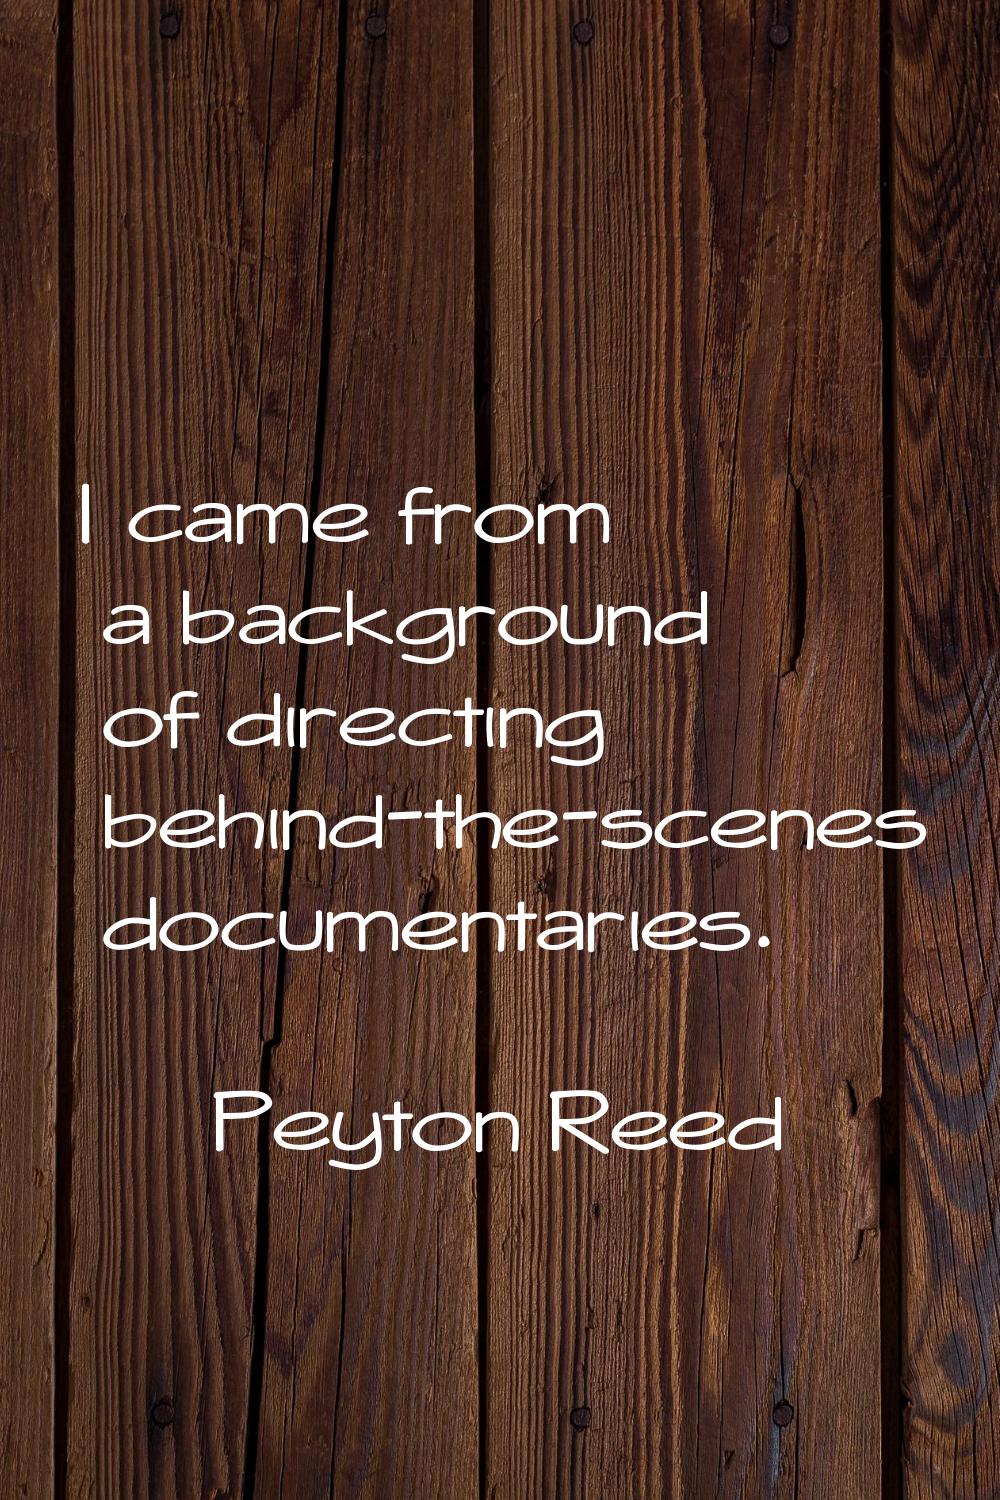 I came from a background of directing behind-the-scenes documentaries.